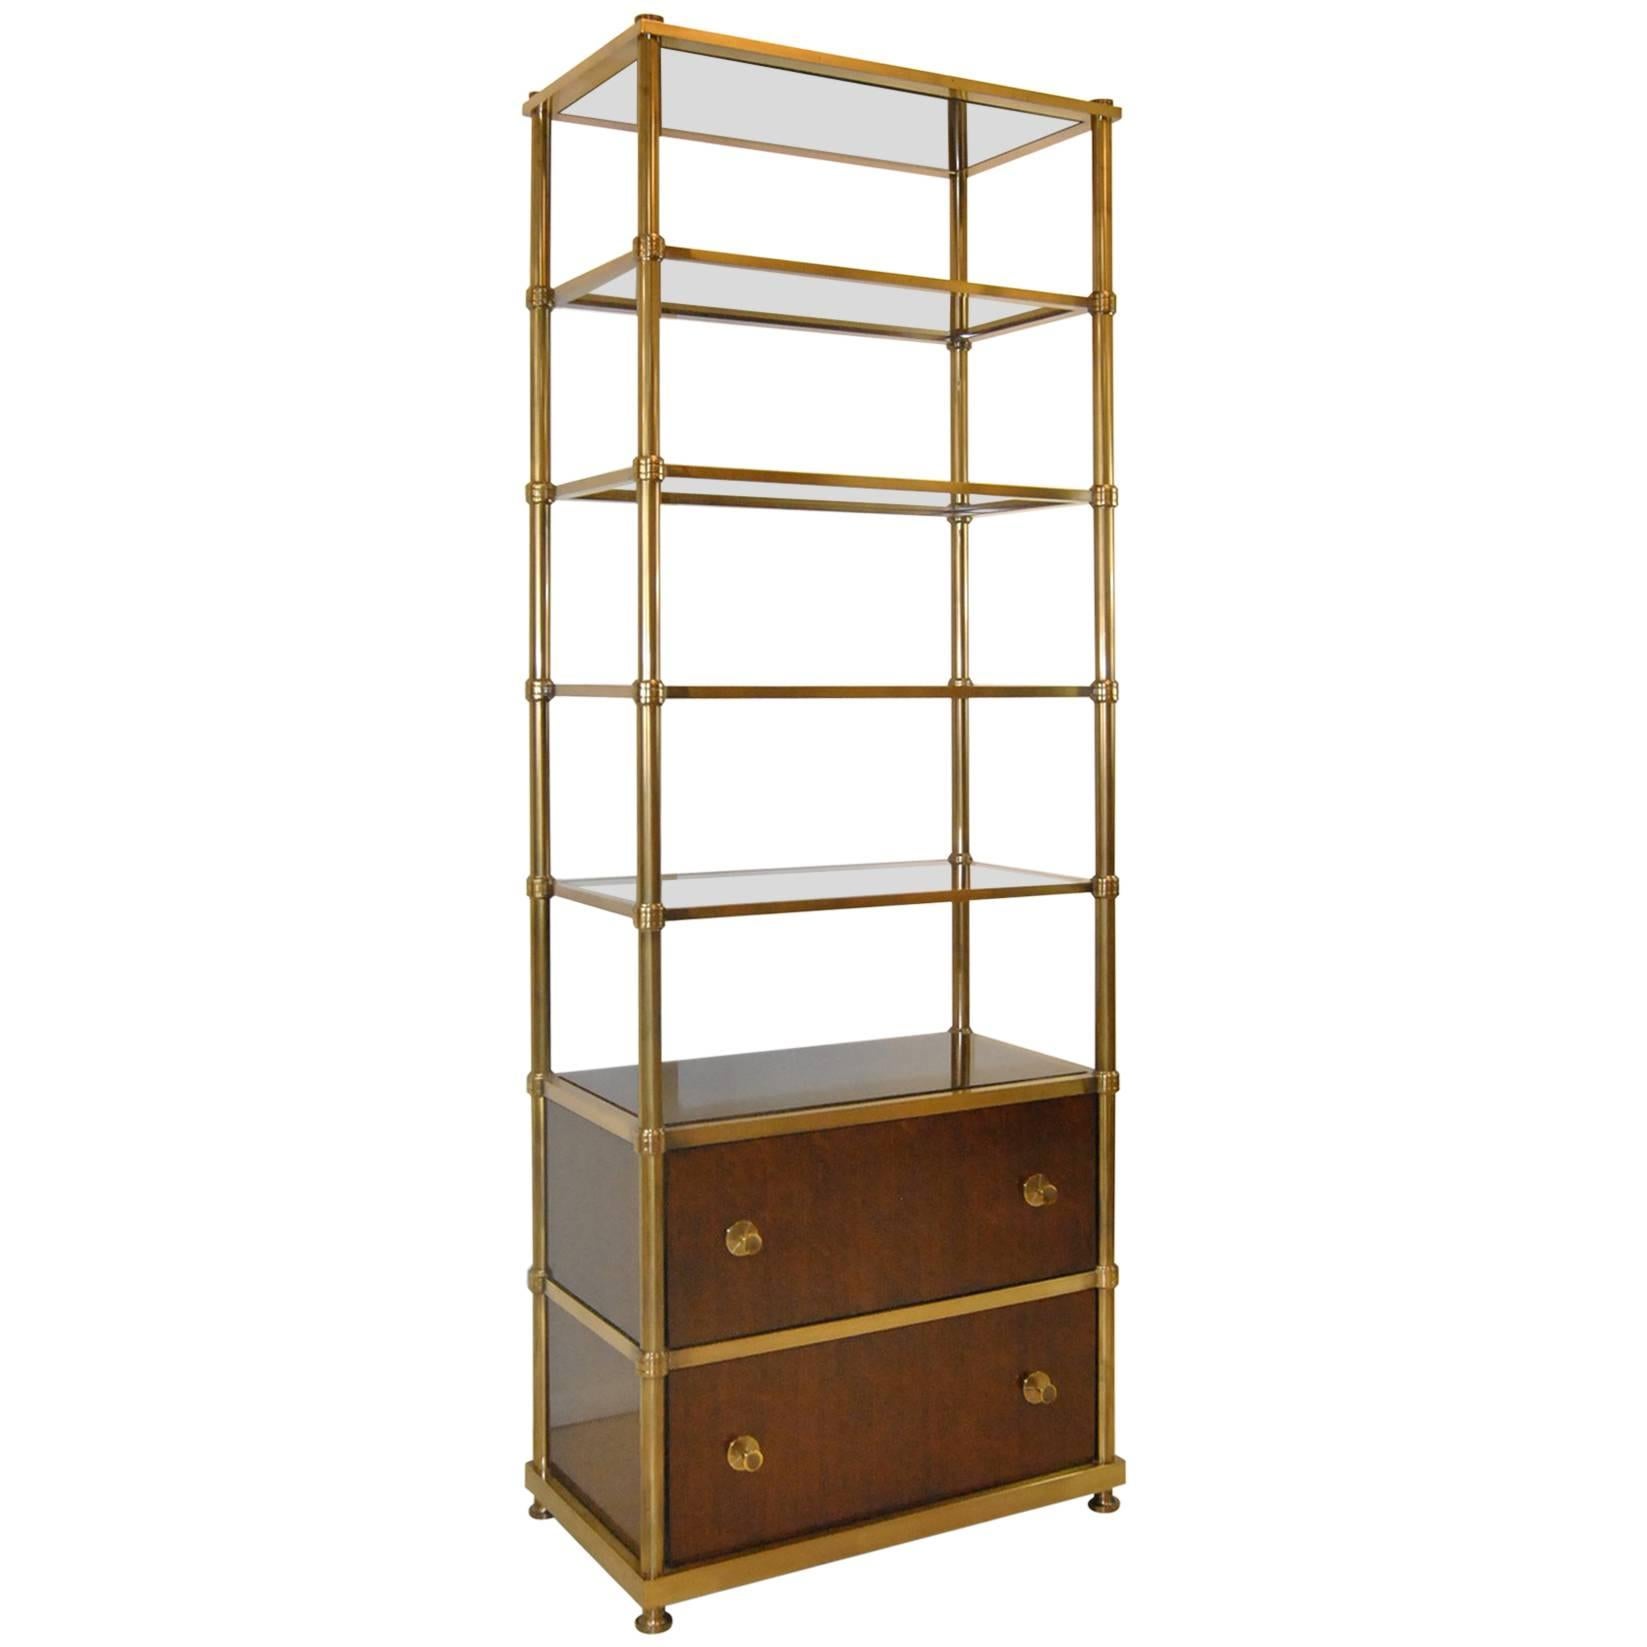 Brass and Walnut Frasier Etagere by Baker, Laura Kirar Collection